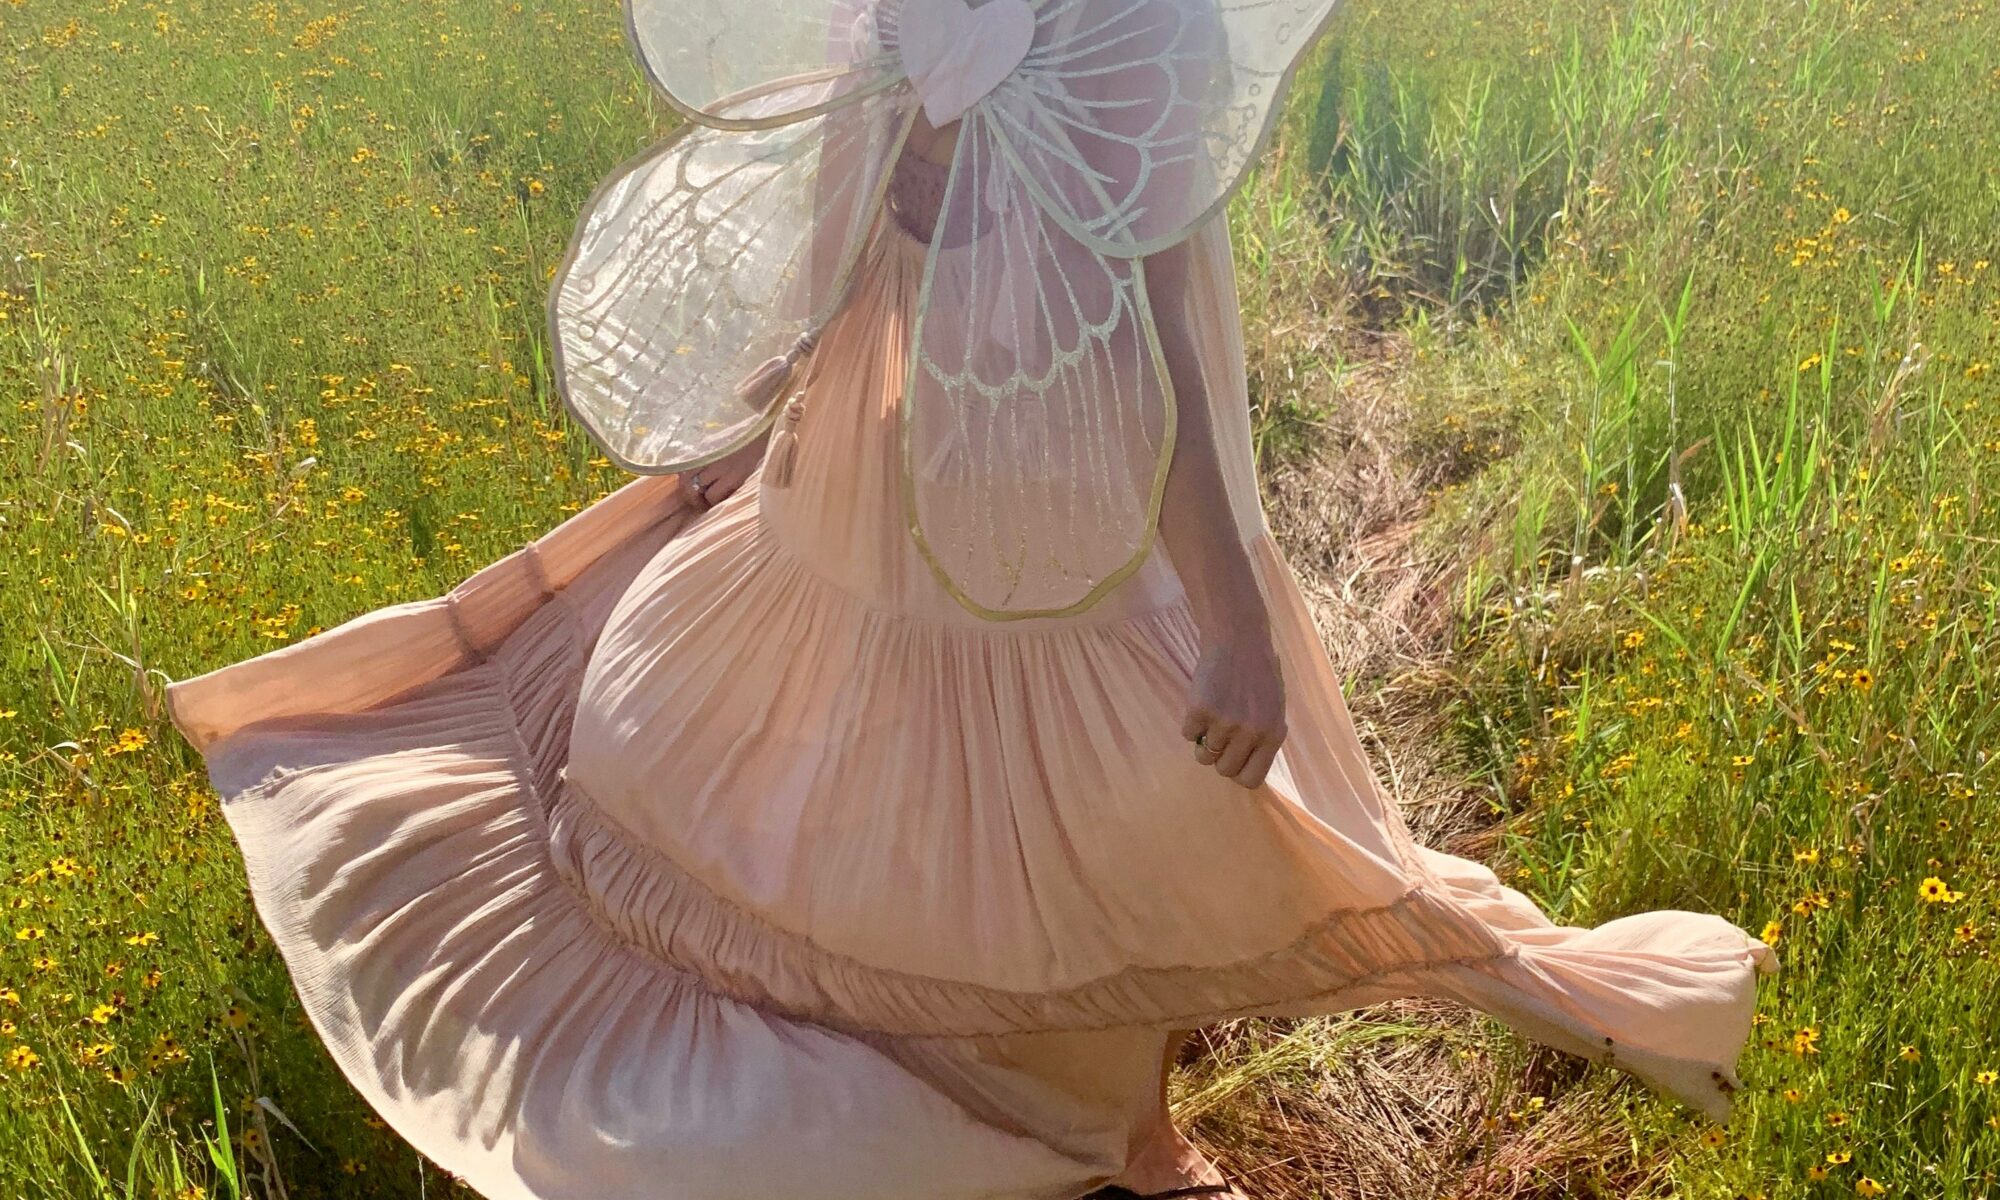 woman in fairy costume standing on green field